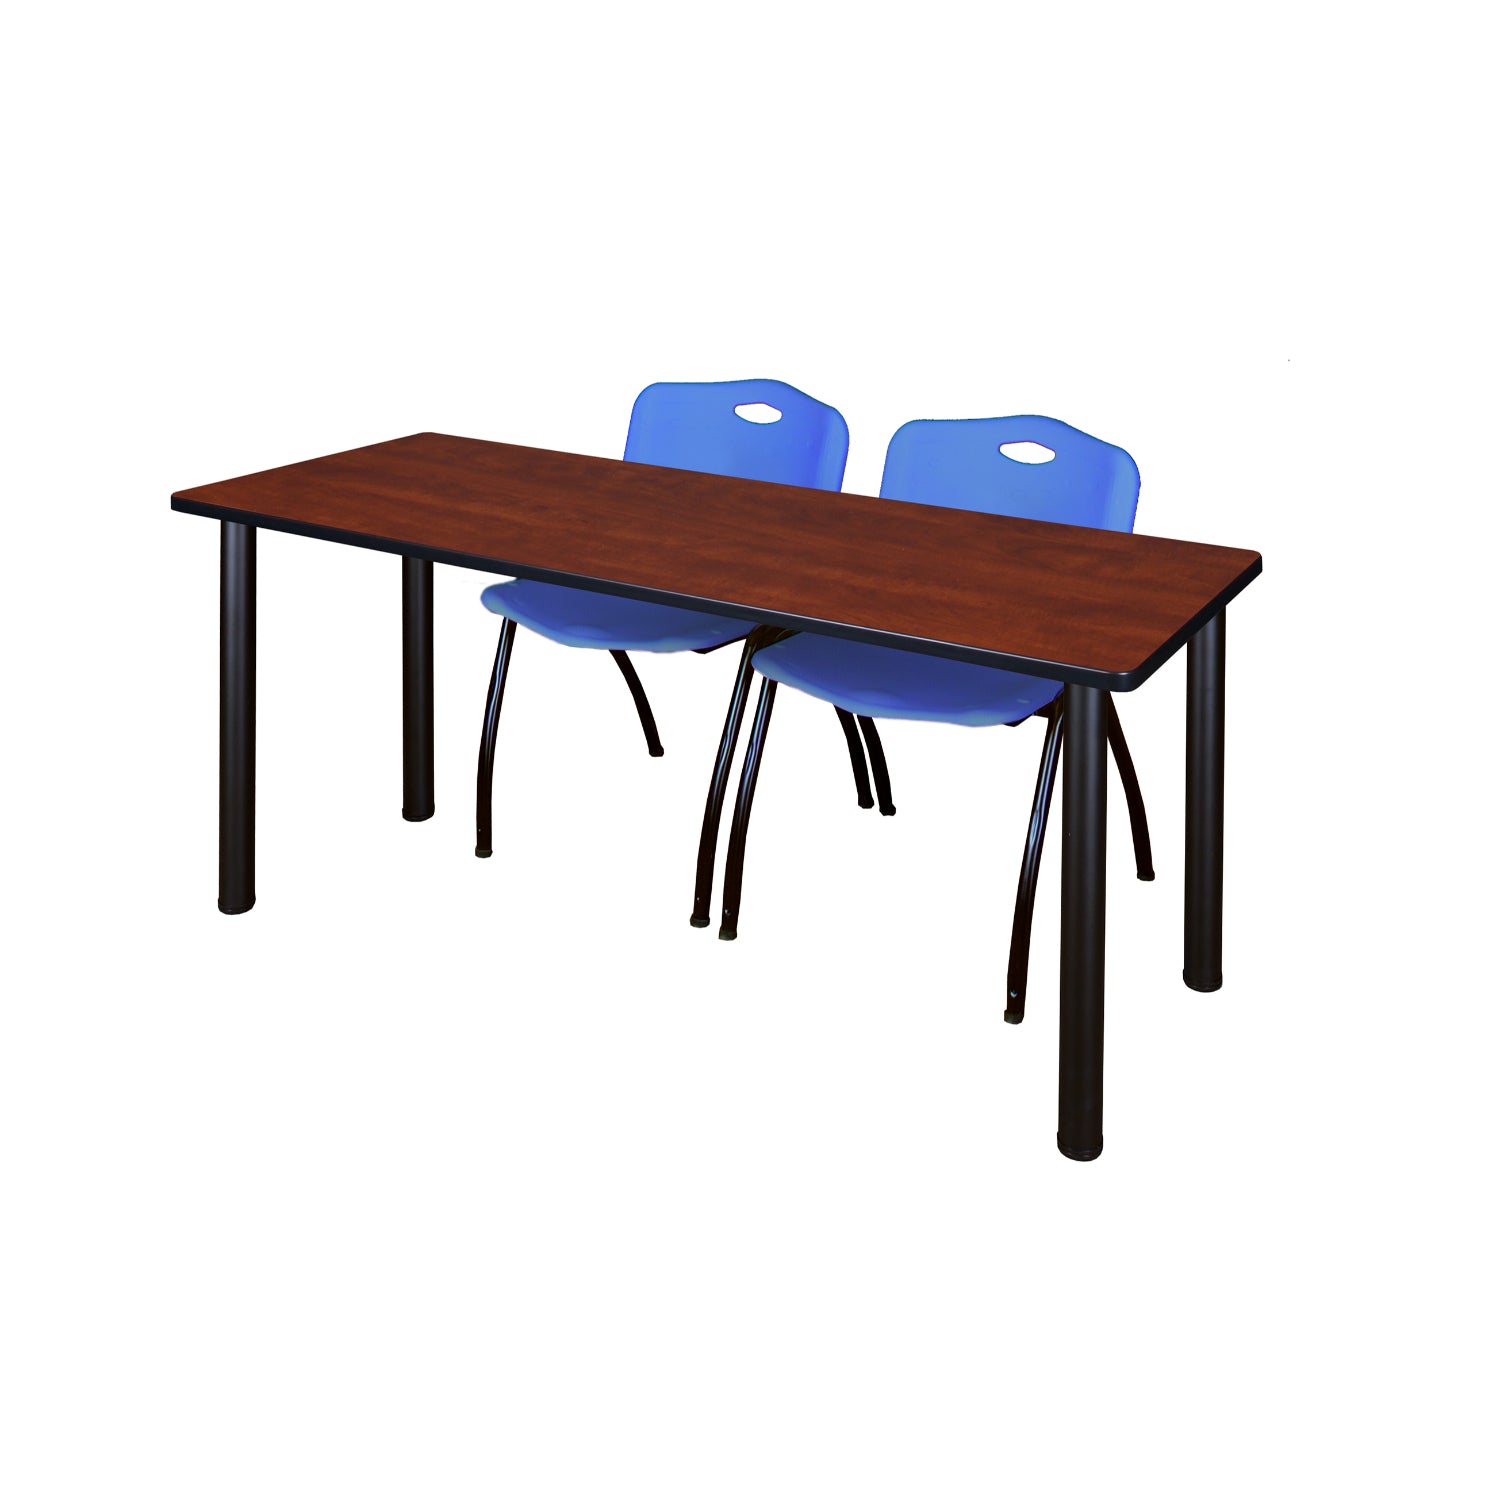 Kee Training Table and Chair Package, Kee 66" x 24" Post Leg Training/Seminar Table with 2 "M" Stack Chairs